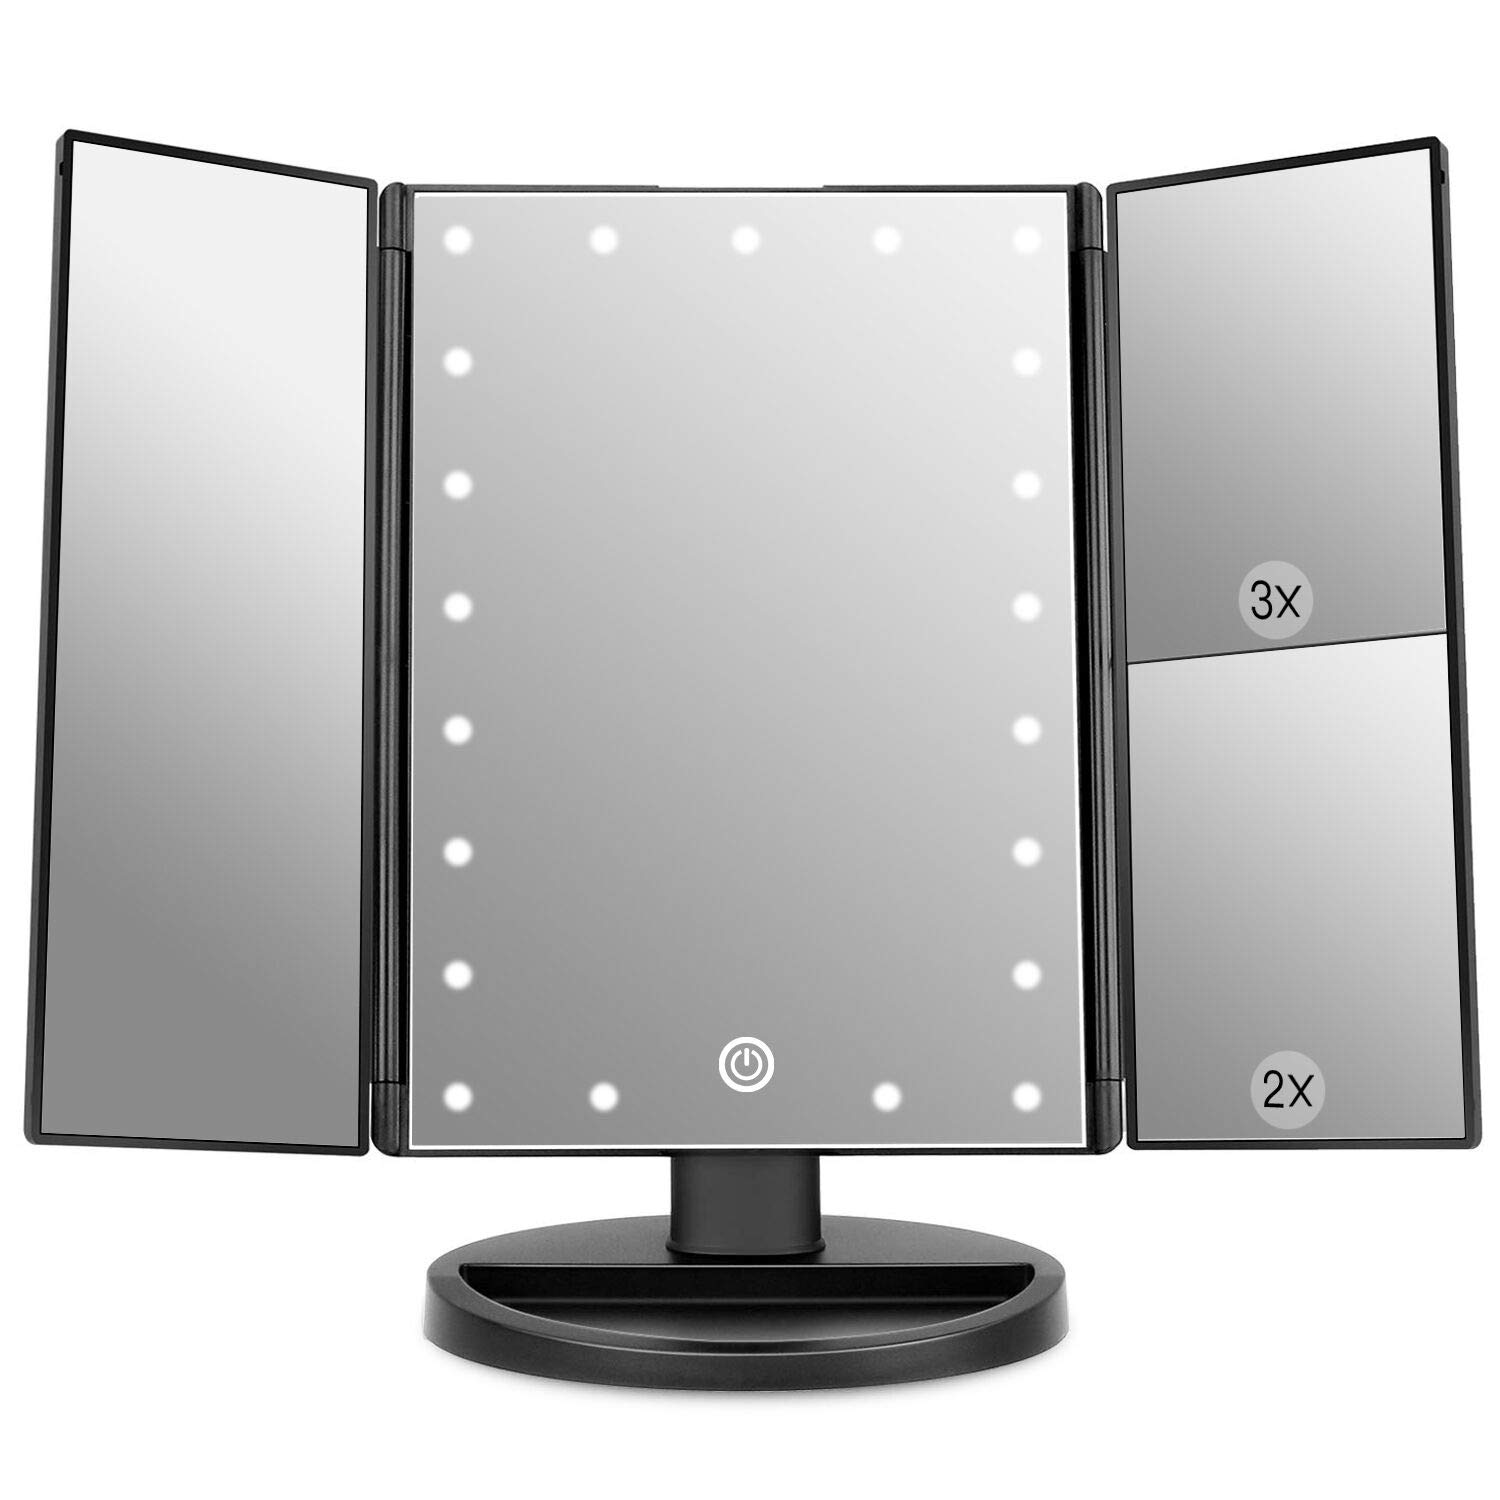 WEILY Dimmable Tri-Fold Makeup Mirror With Lights